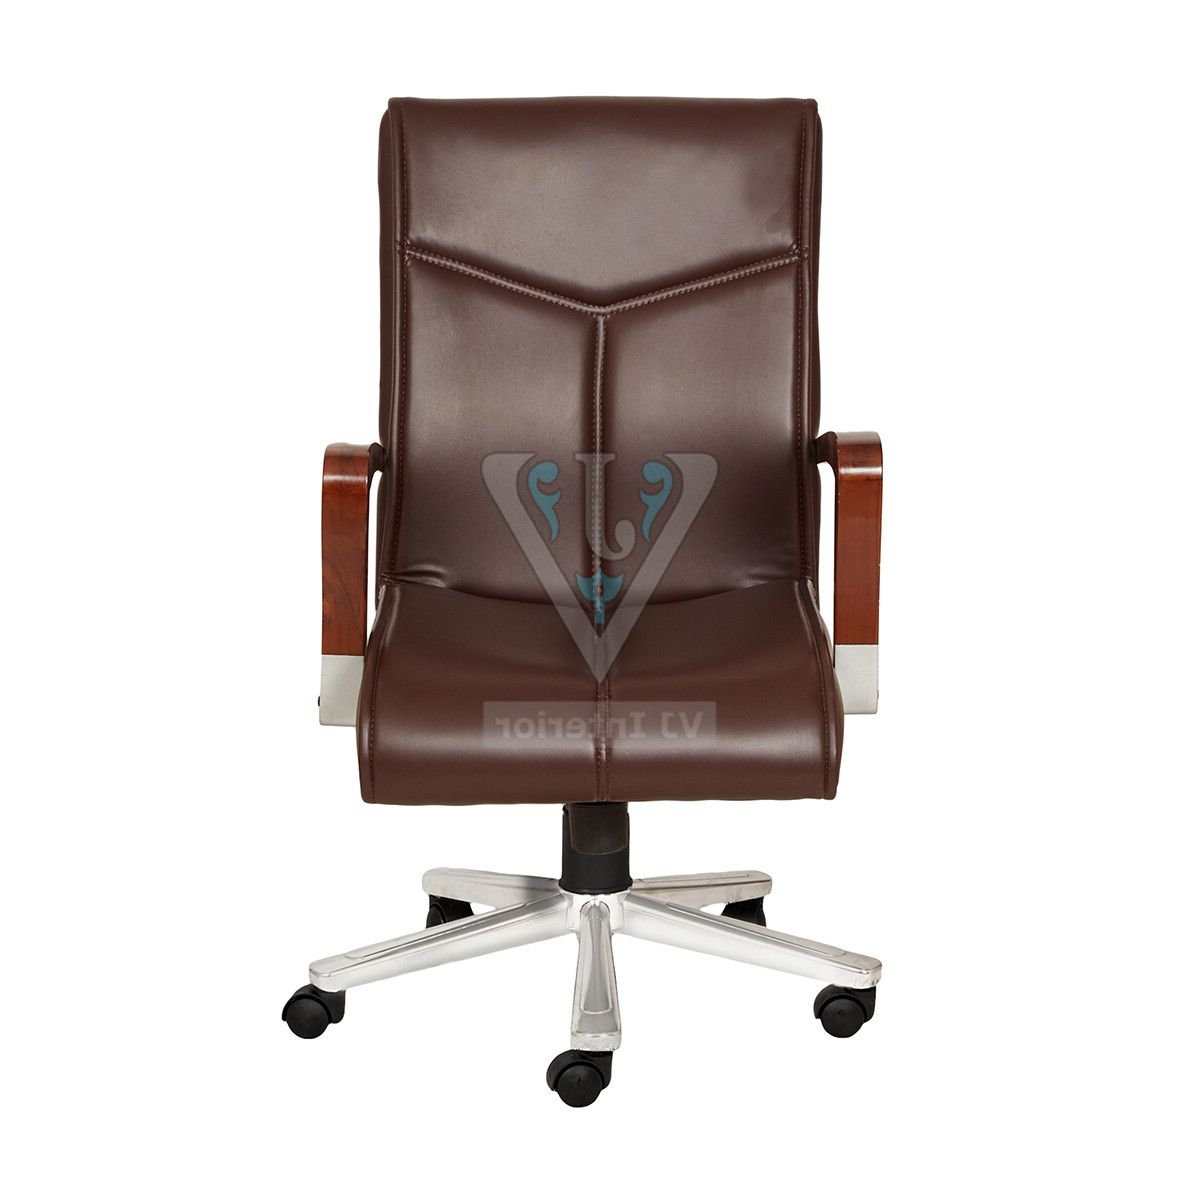 Classic Leather Executive Office Chair With Wooden Arm In Most Popular Classic Executive Office Chairs (View 6 of 15)